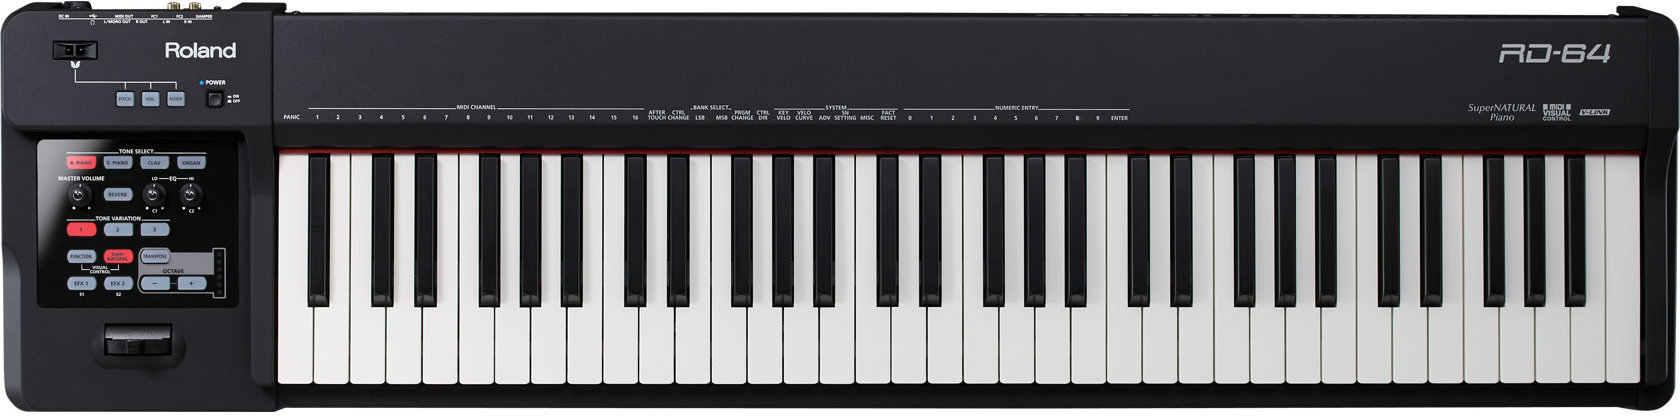 Cyfrowe stage pianino Roland RD 64 Digital piano